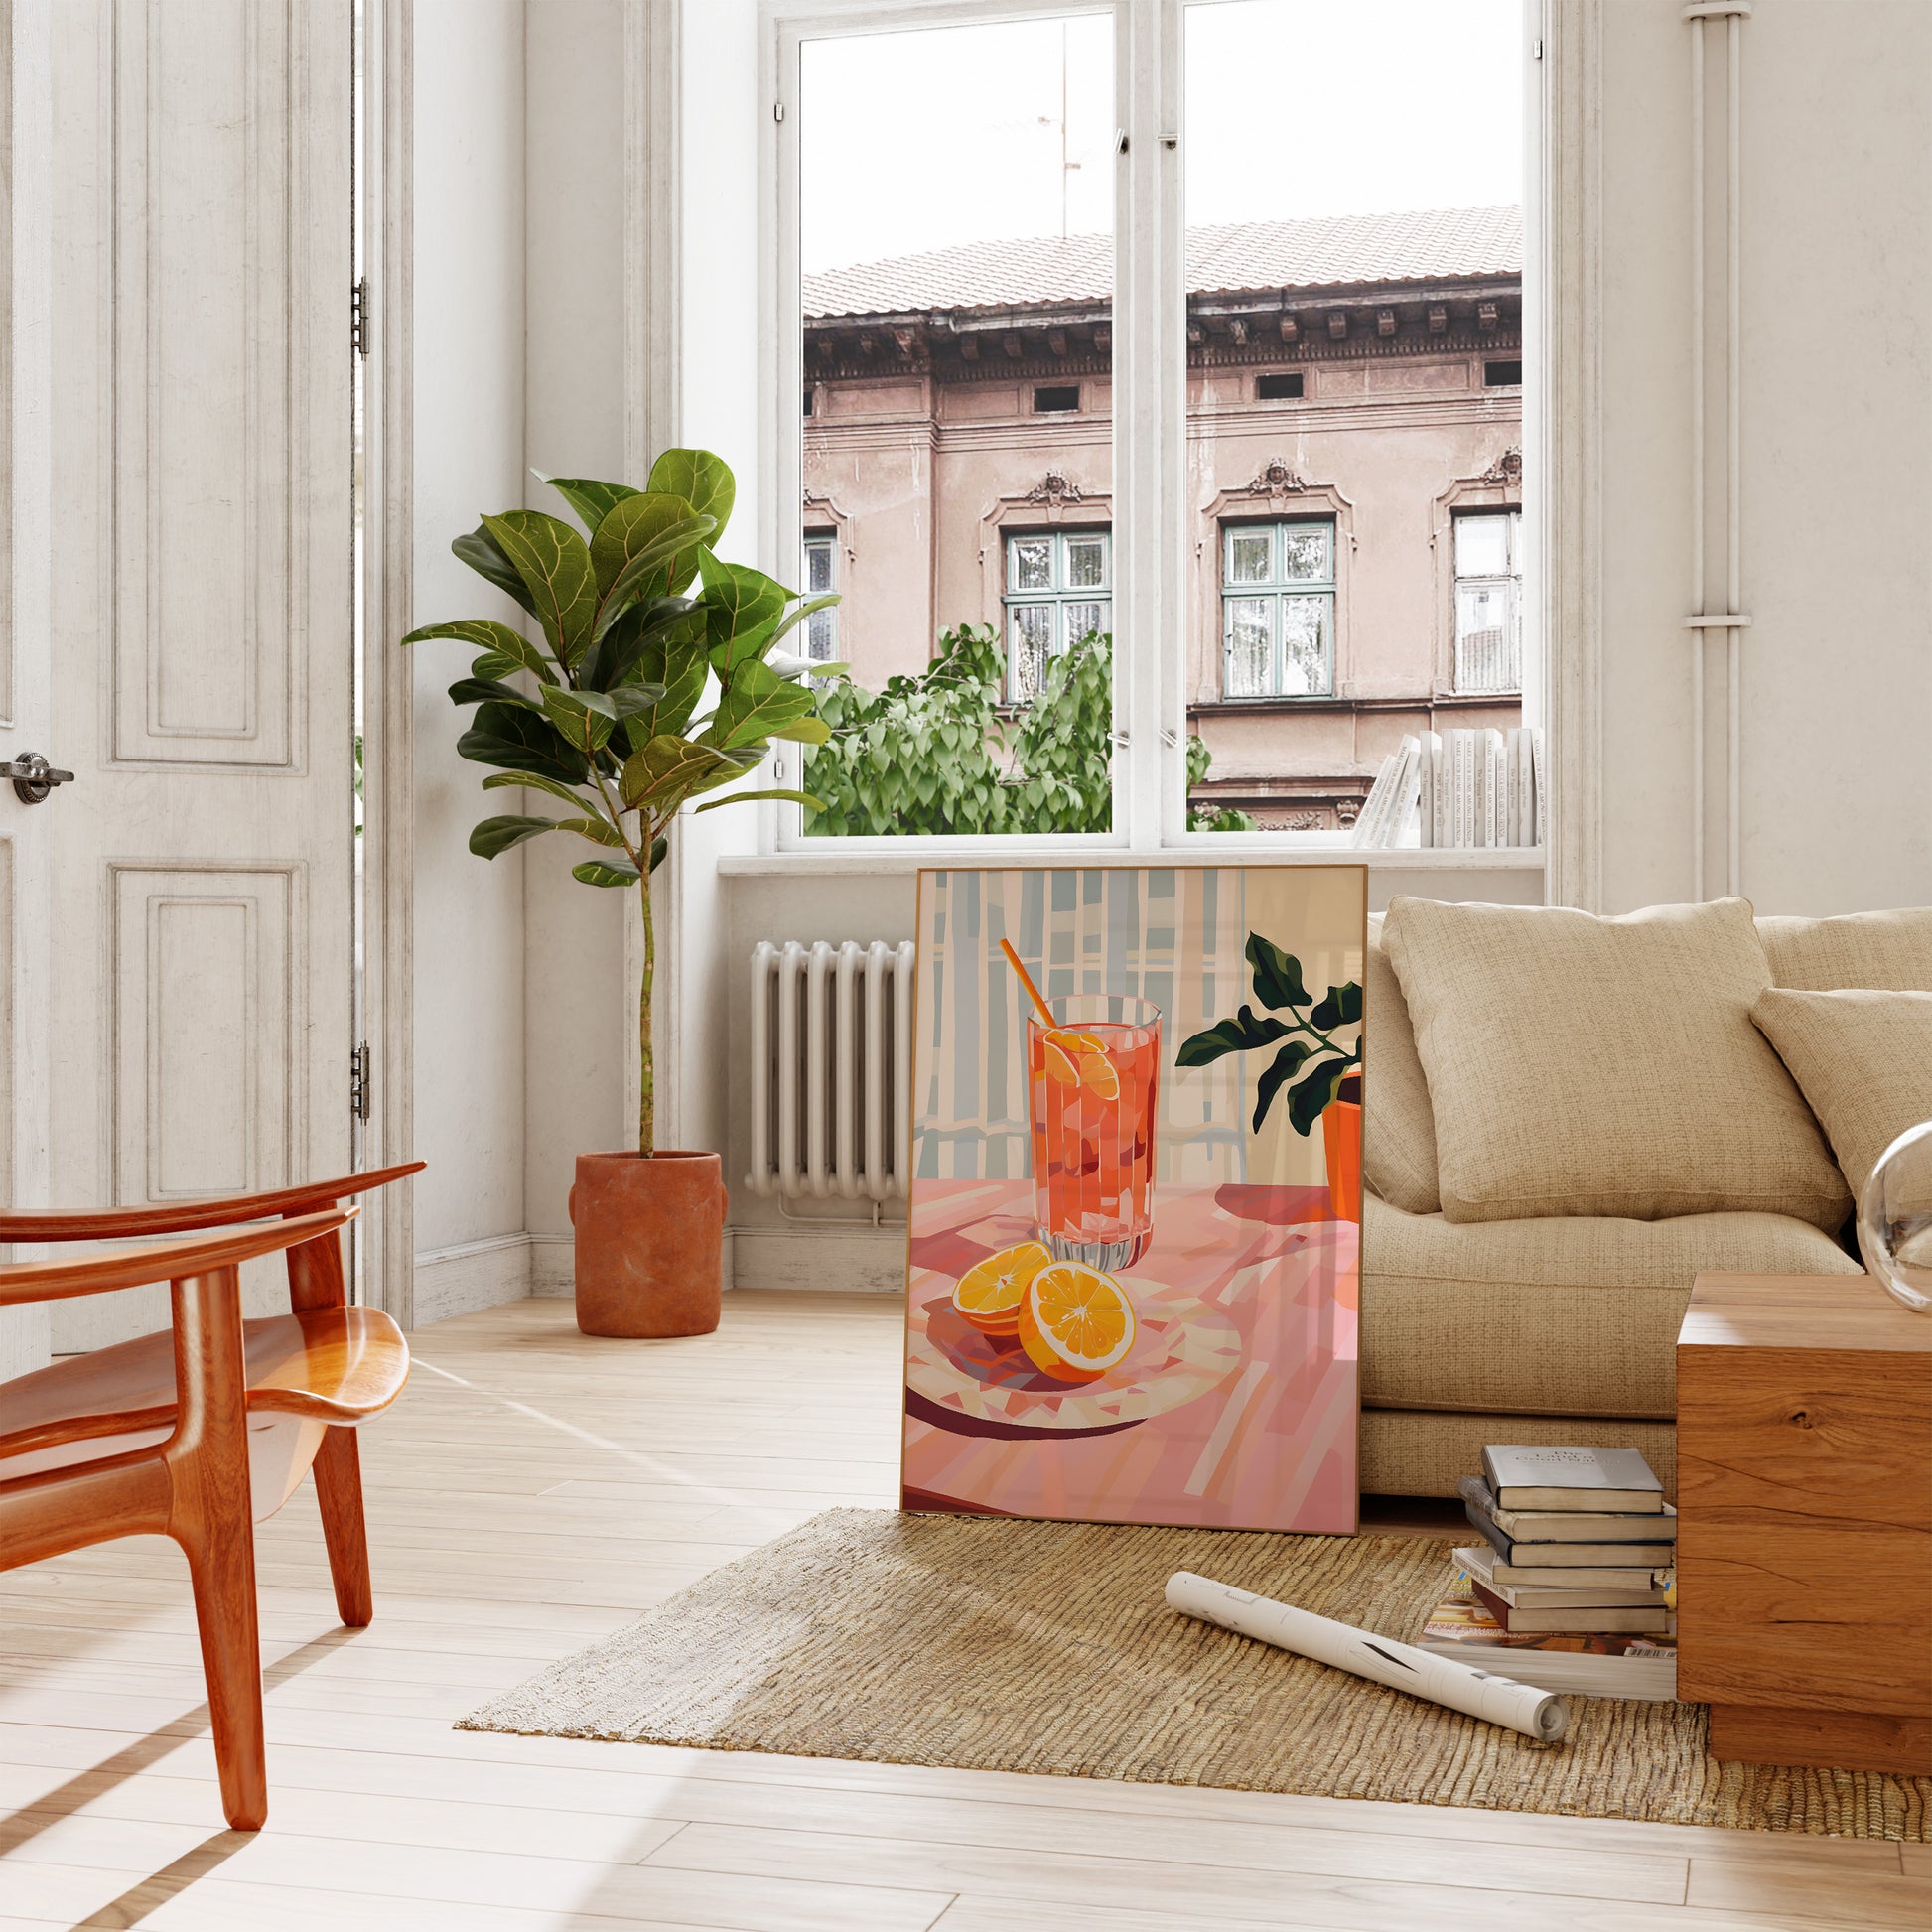 A bright living room with a plant, modern furniture, and a painting of oranges on a Plexiglas stand.